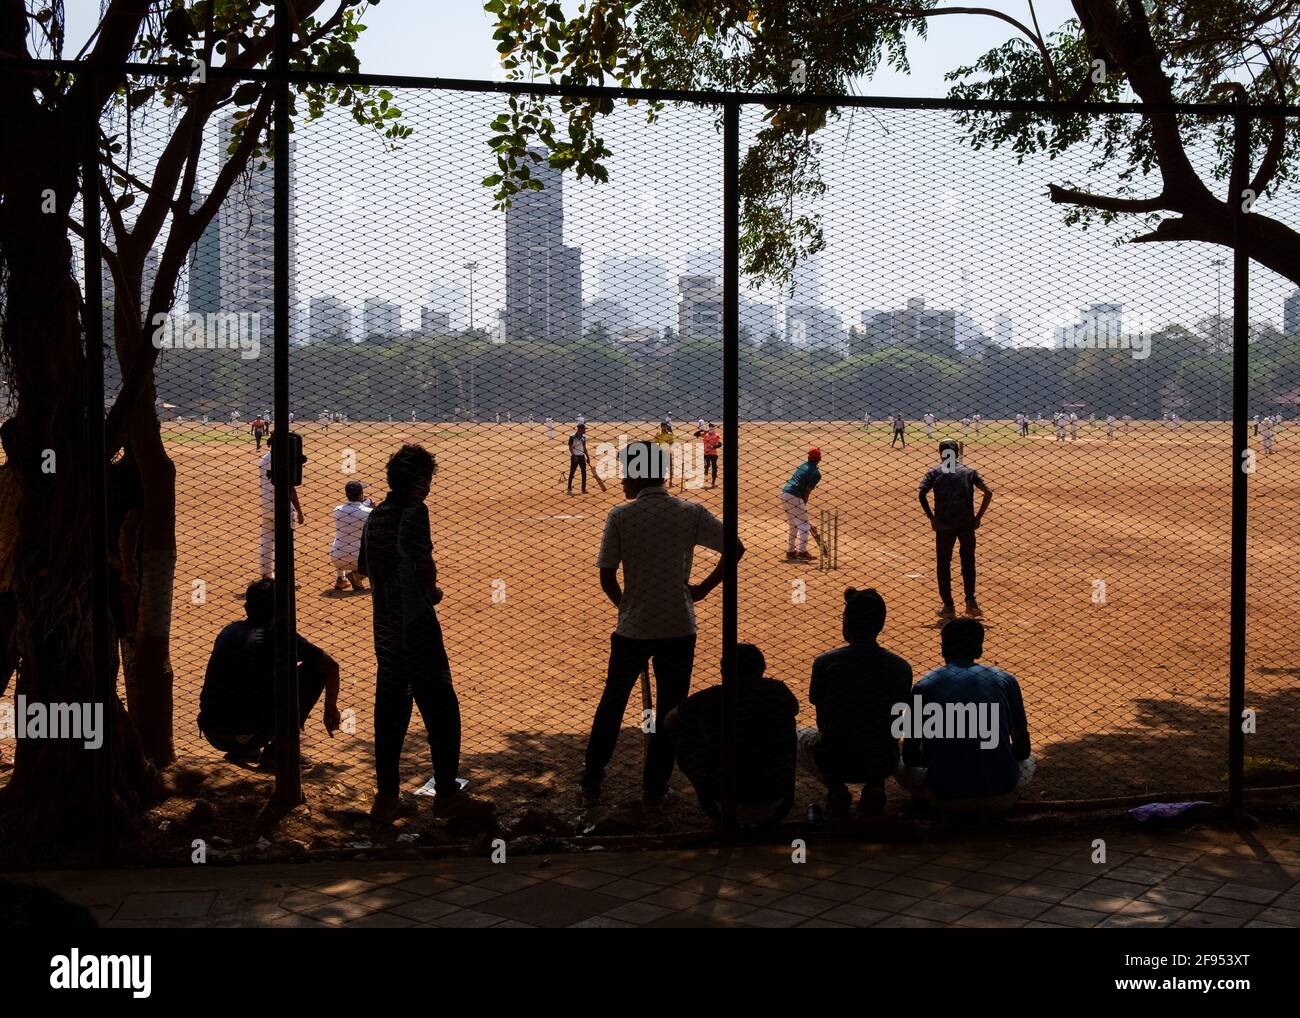 Silhouette of teenagers standing behind a fence watching a cricket match in Shivaji Park in Mumbai-Dadar,Maharashtra, India Stock Photo